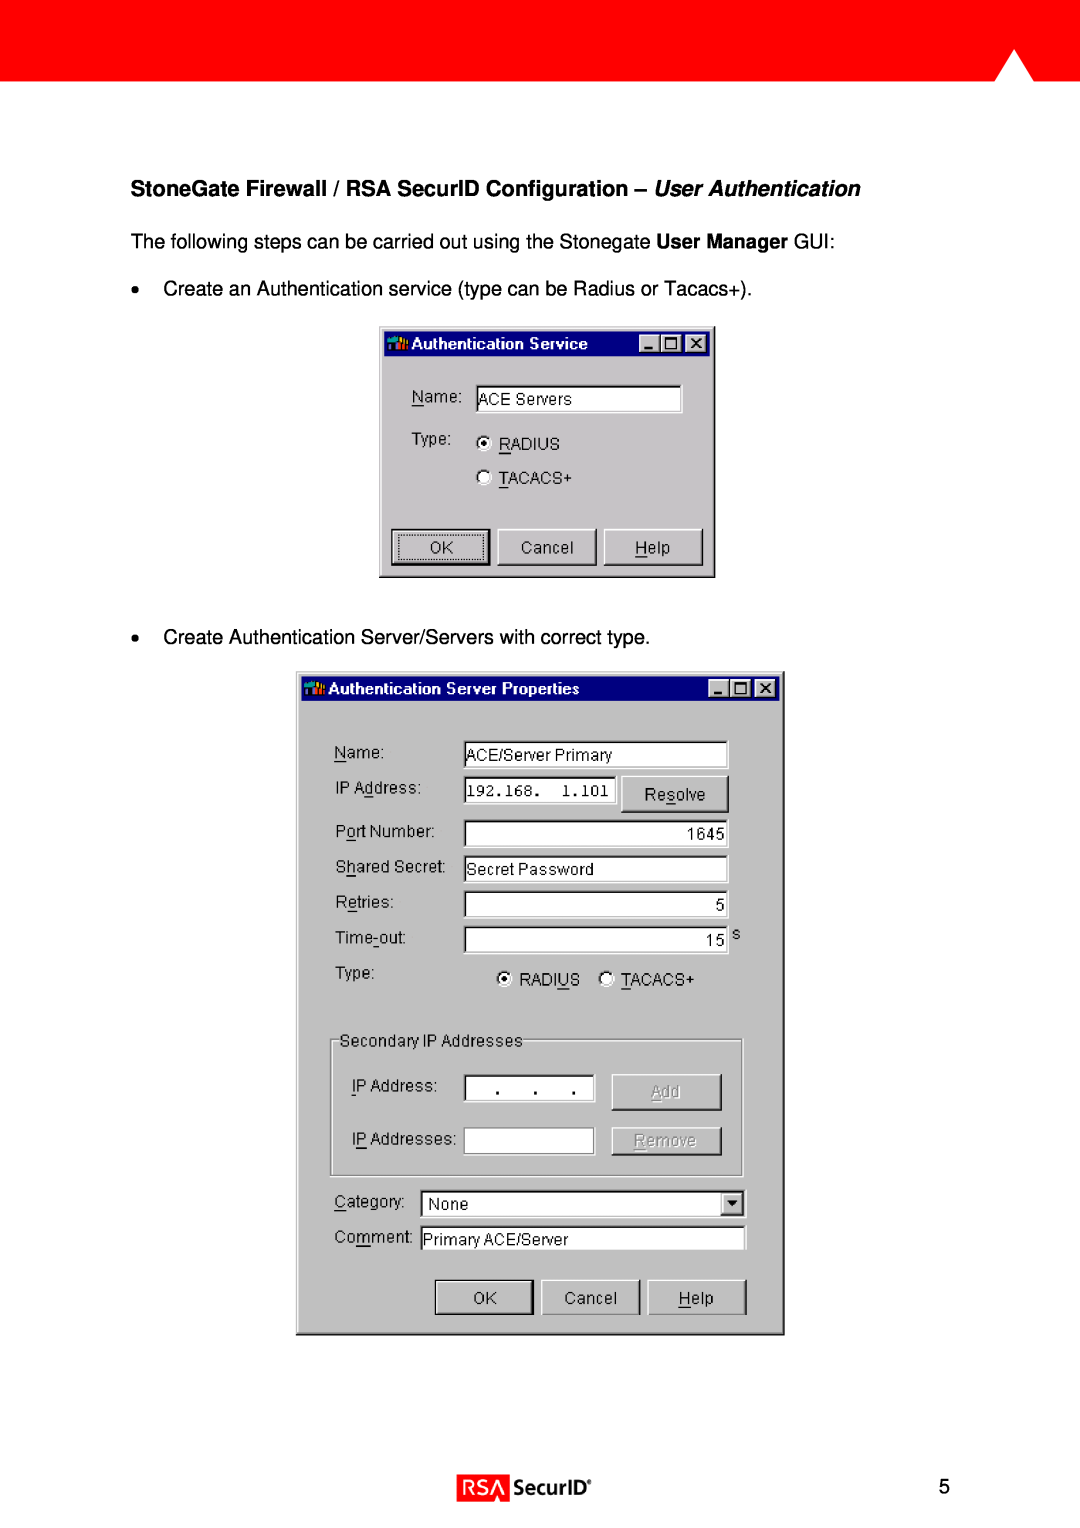 RSA Security 1.6.3 manual The following steps can be carried out using the Stonegate User Manager GUI 